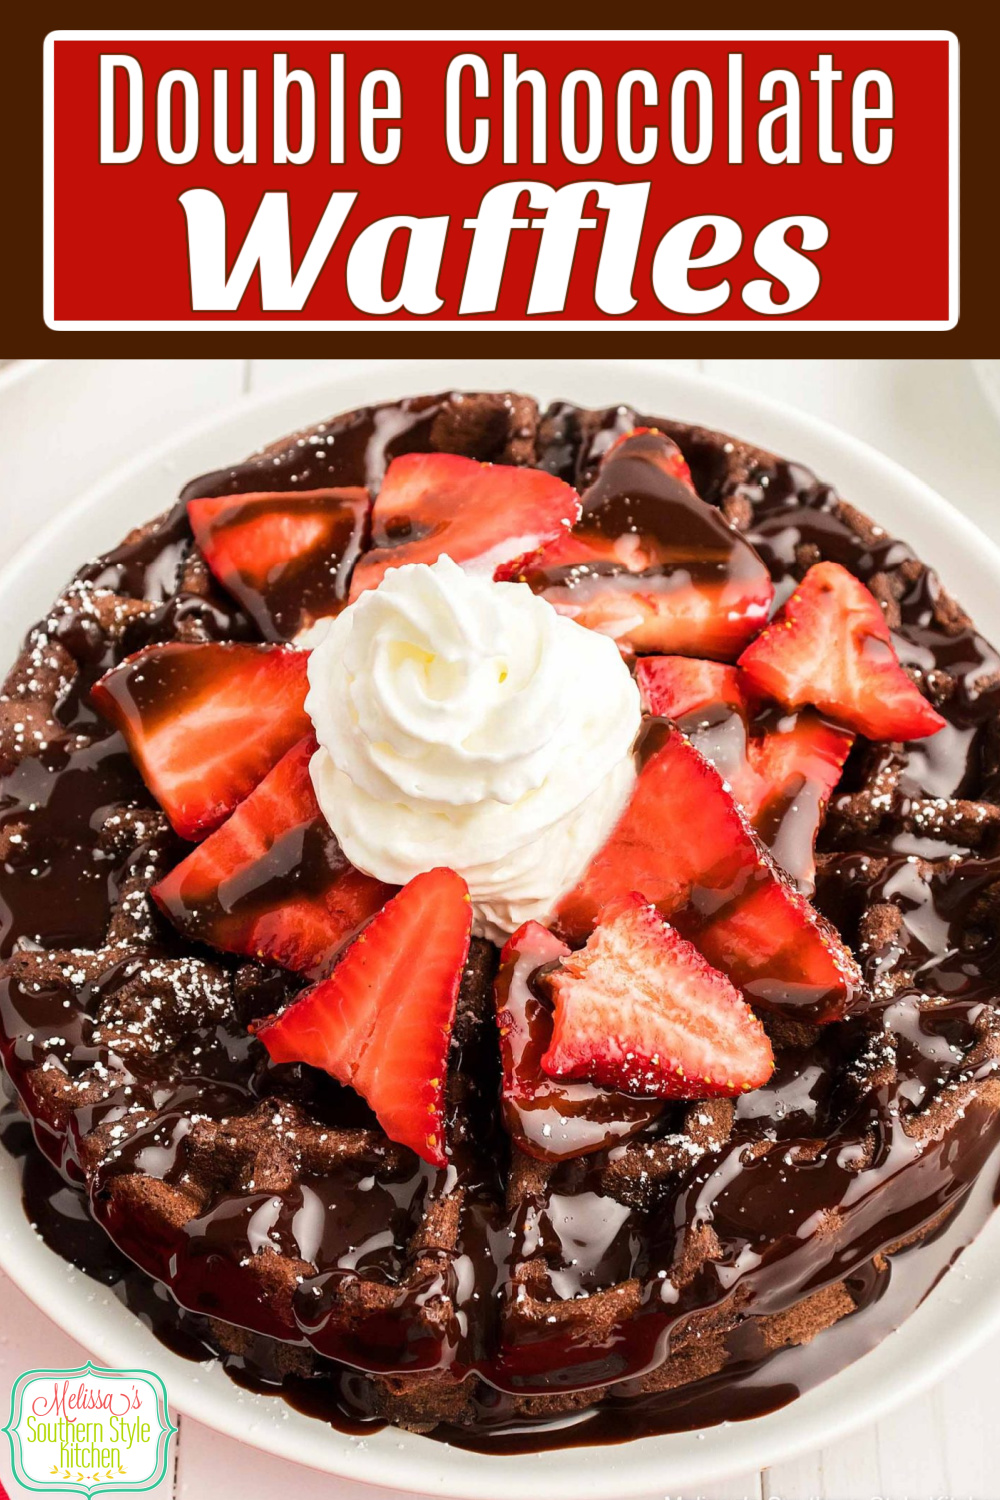 These Double Chocolate Buttermilk Waffles can be made for breakfast, brunch or dessert topped with berries, chocolate syrup and fresh cream #chocolatewaffles #doublechocolatewaffles #wafflesrecipe #chocolatechipwaffles #brunchrecipes #desserts #dessertfoodrecipes #southernrecipes #holidaybrunch #chocolate via @melissasssk